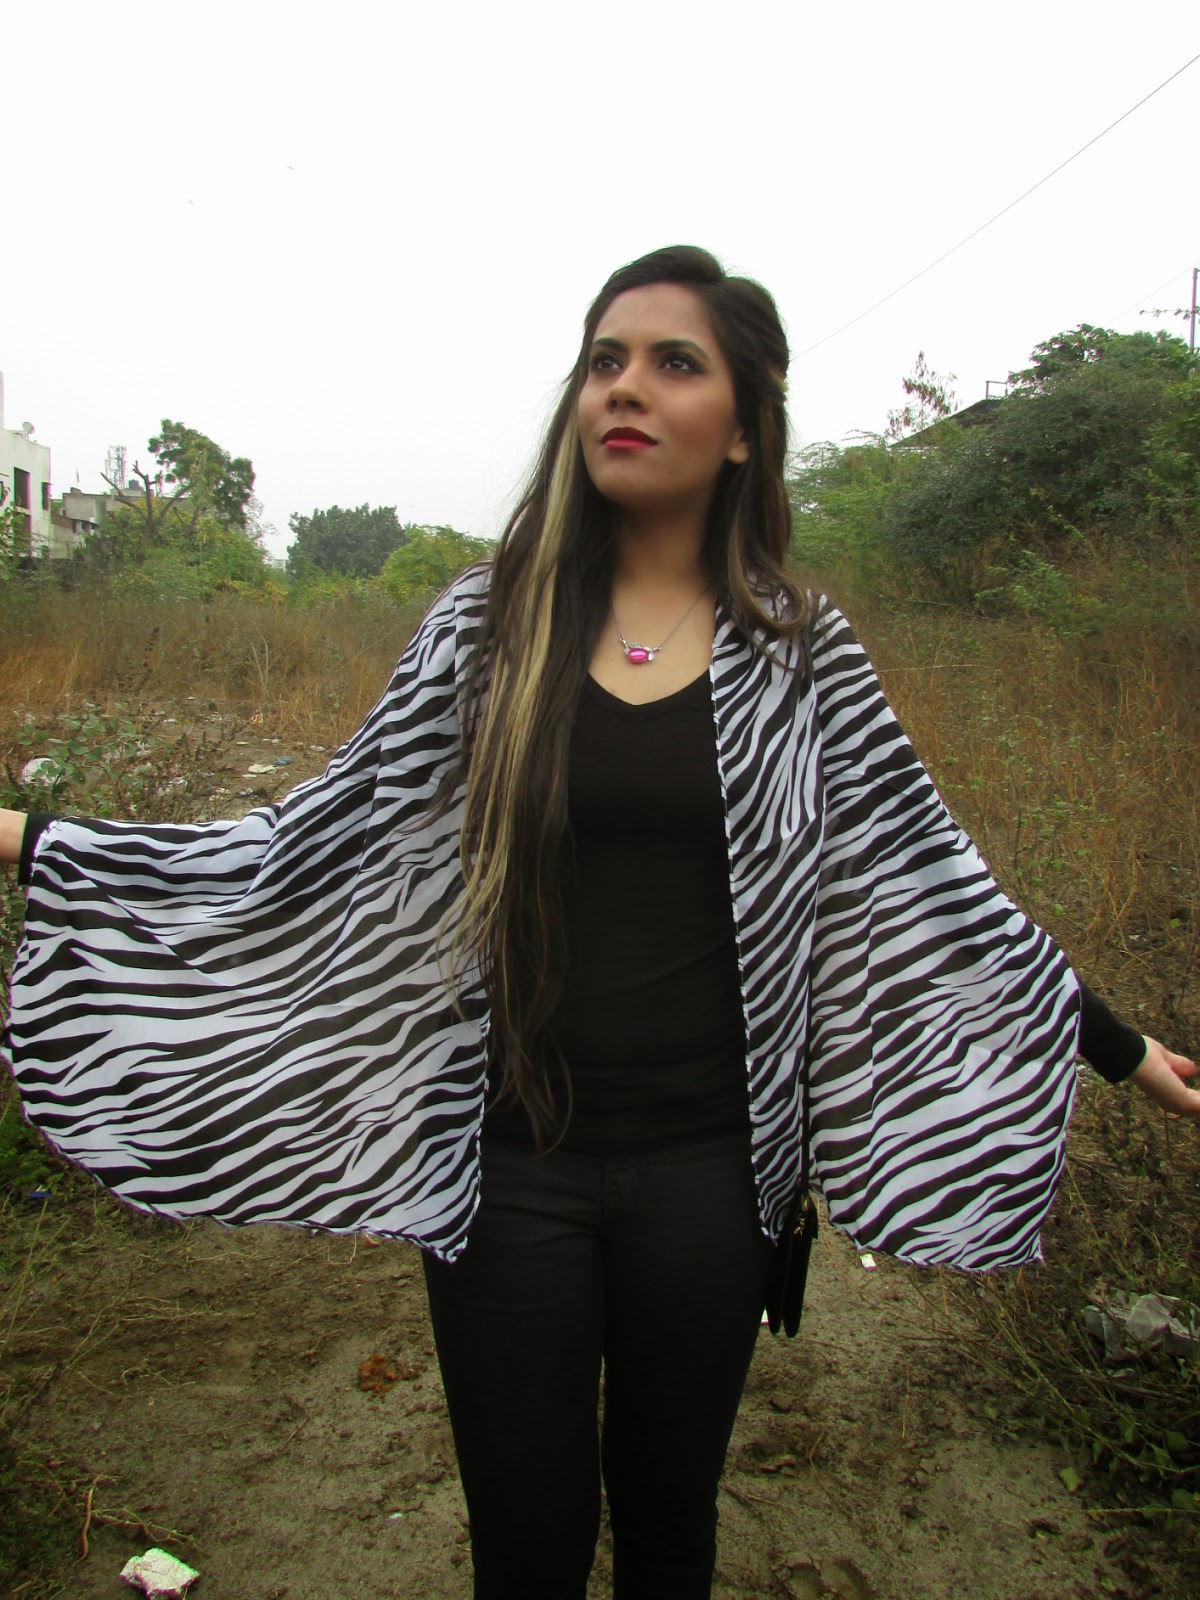 scarf, cheap scarf, zebra printed scarf, cheap scarves online, how to wear scarf, how to wear scarf as cape, latest trend 2015, echopaul, fashion, black white scarf, echopaul review, different ways to wear scarf, how to style scarf, soft scarf, animal print, animal print scarf, monochromatic scarf, monochromatic print, beauty , fashion,beauty and fashion,beauty blog, fashion blog , indian beauty blog,indian fashion blog, beauty and fashion blog, indian beauty and fashion blog, indian bloggers, indian beauty bloggers, indian fashion bloggers,indian bloggers online, top 10 indian bloggers, top indian bloggers,top 10 fashion bloggers, indian bloggers on blogspot,home remedies, how to 